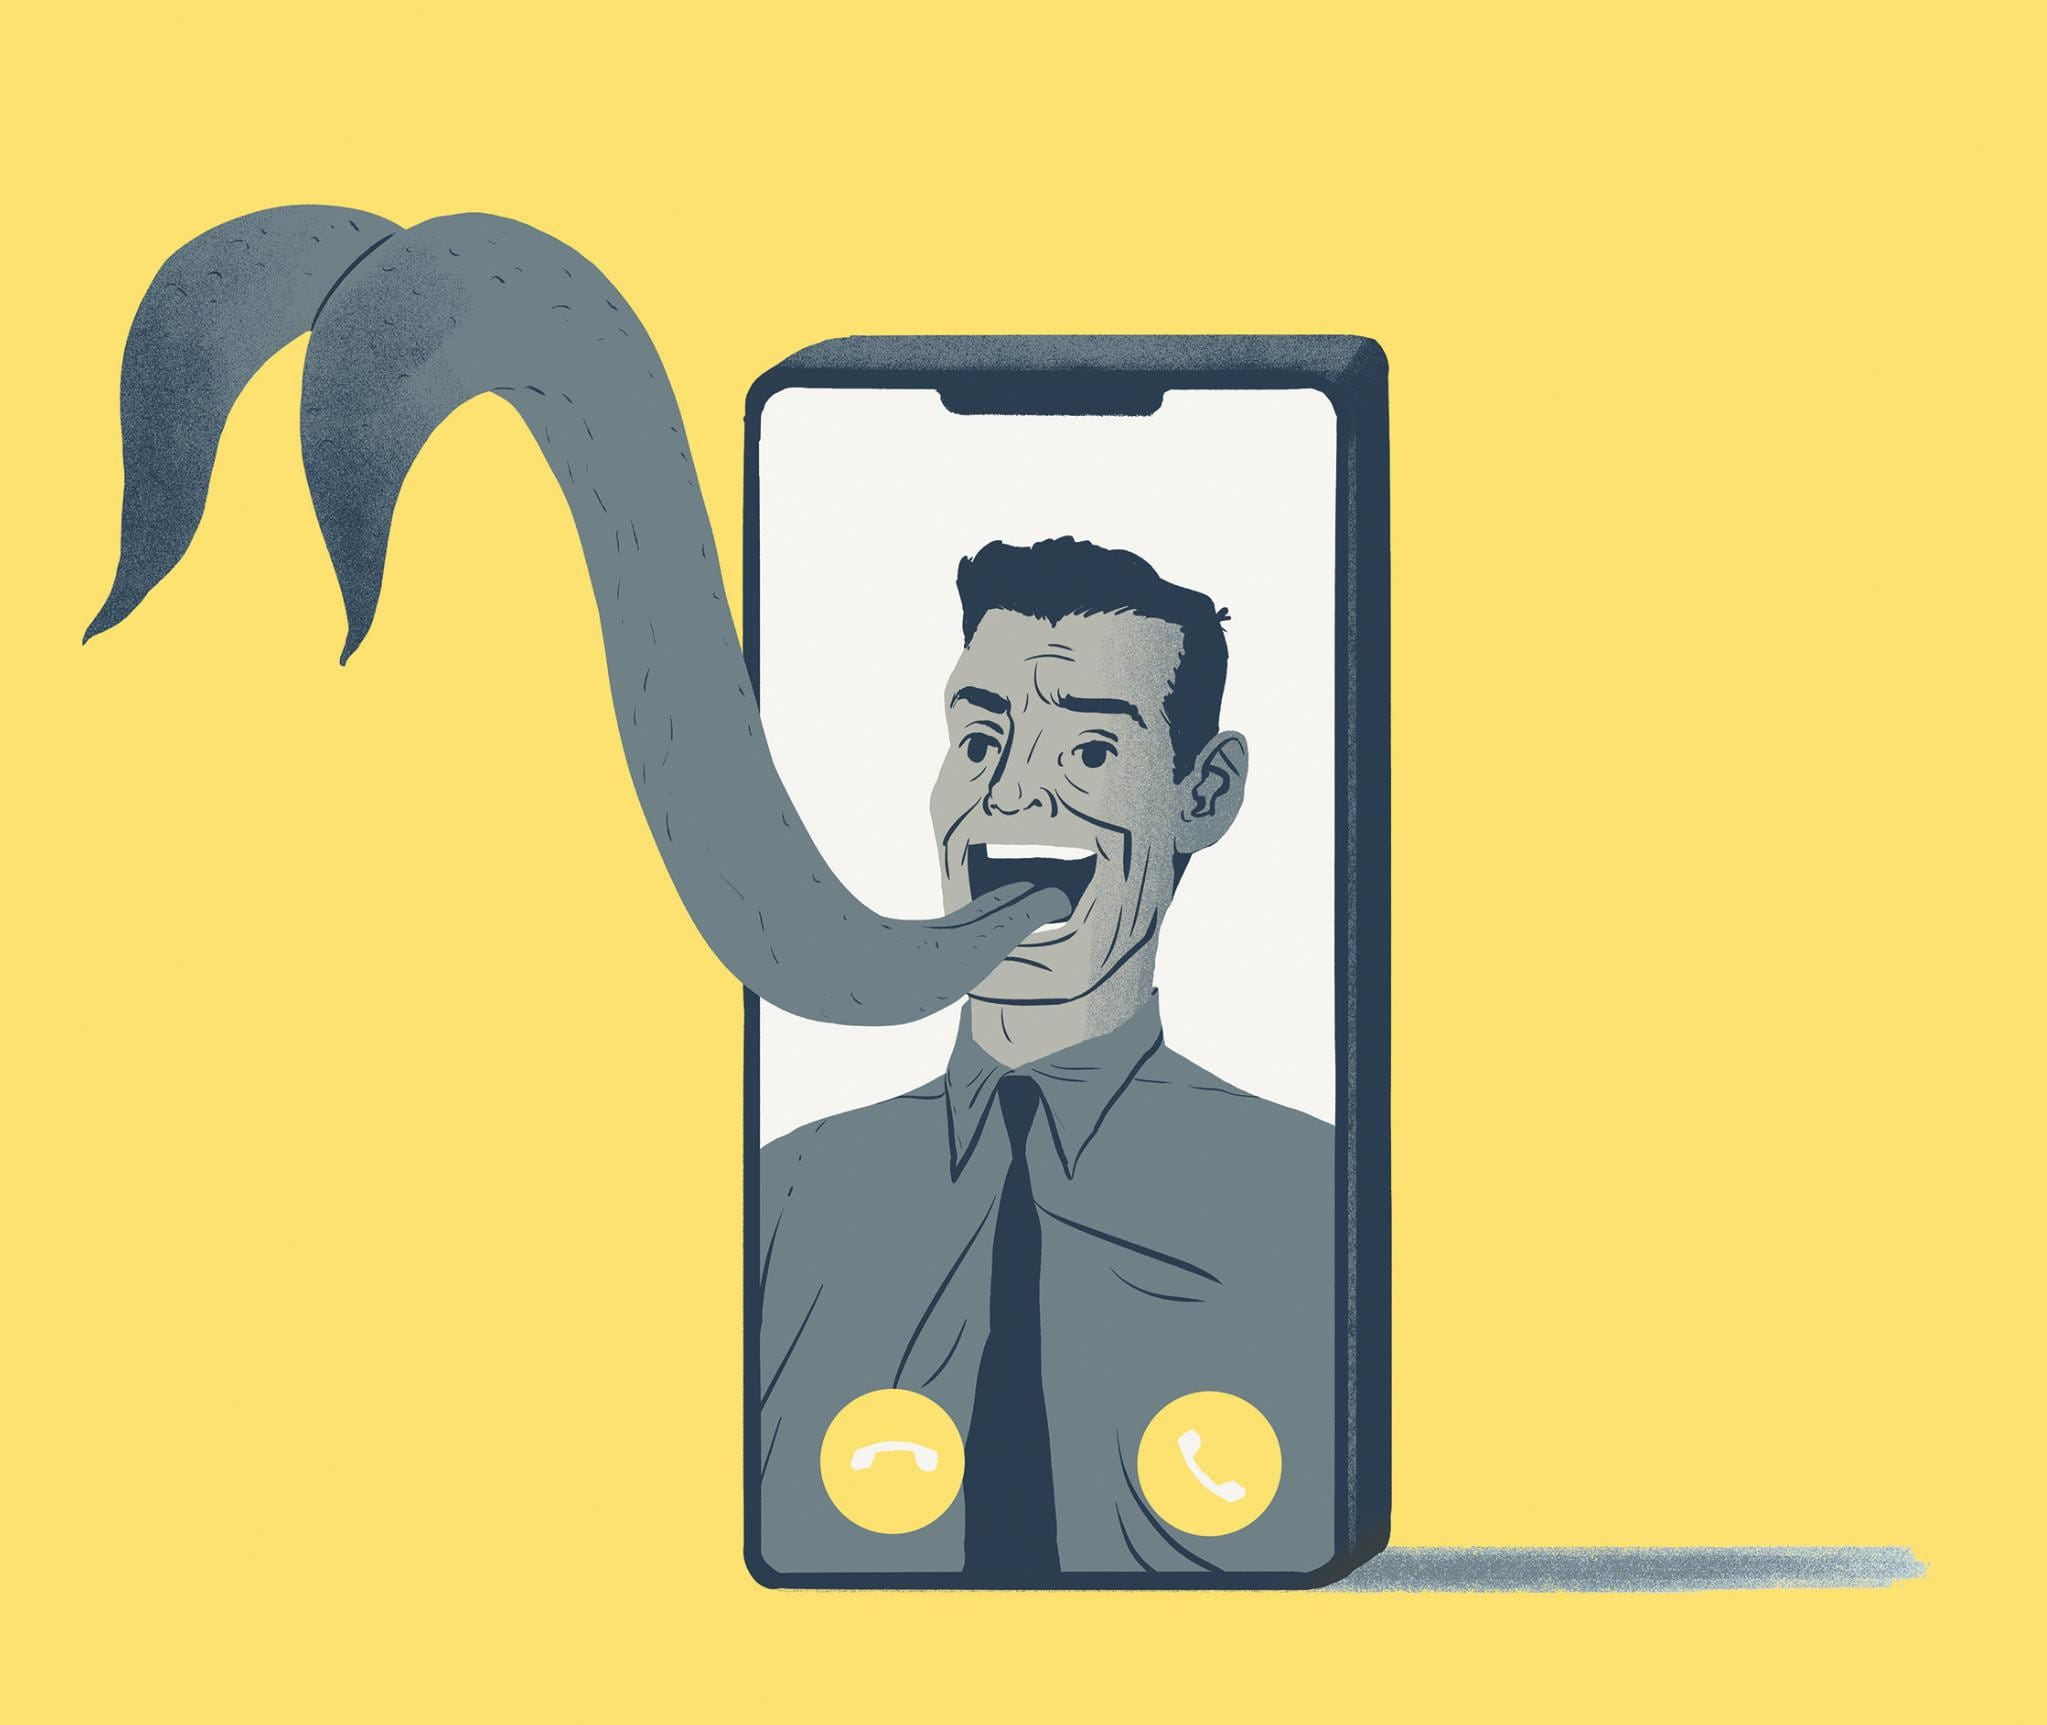 A stylised person with a forked tongue coming out of the screen on a mobile phone